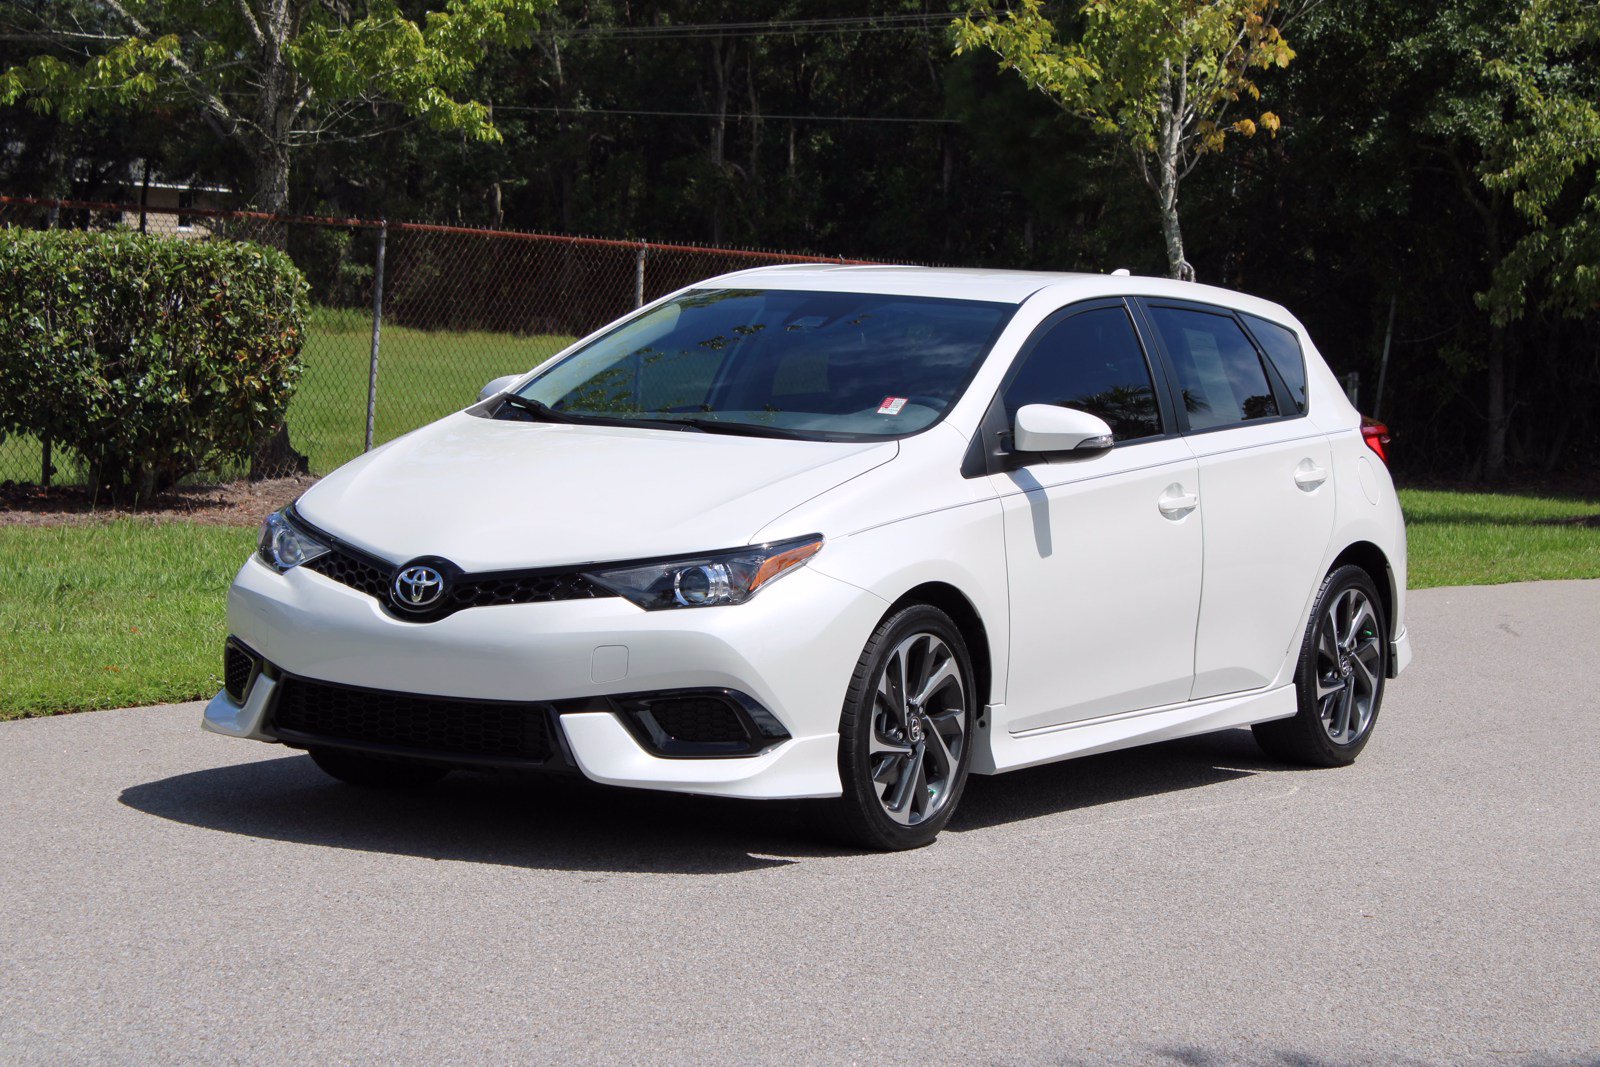 Certified PreOwned 2017 Toyota Corolla iM Base FWD 5D